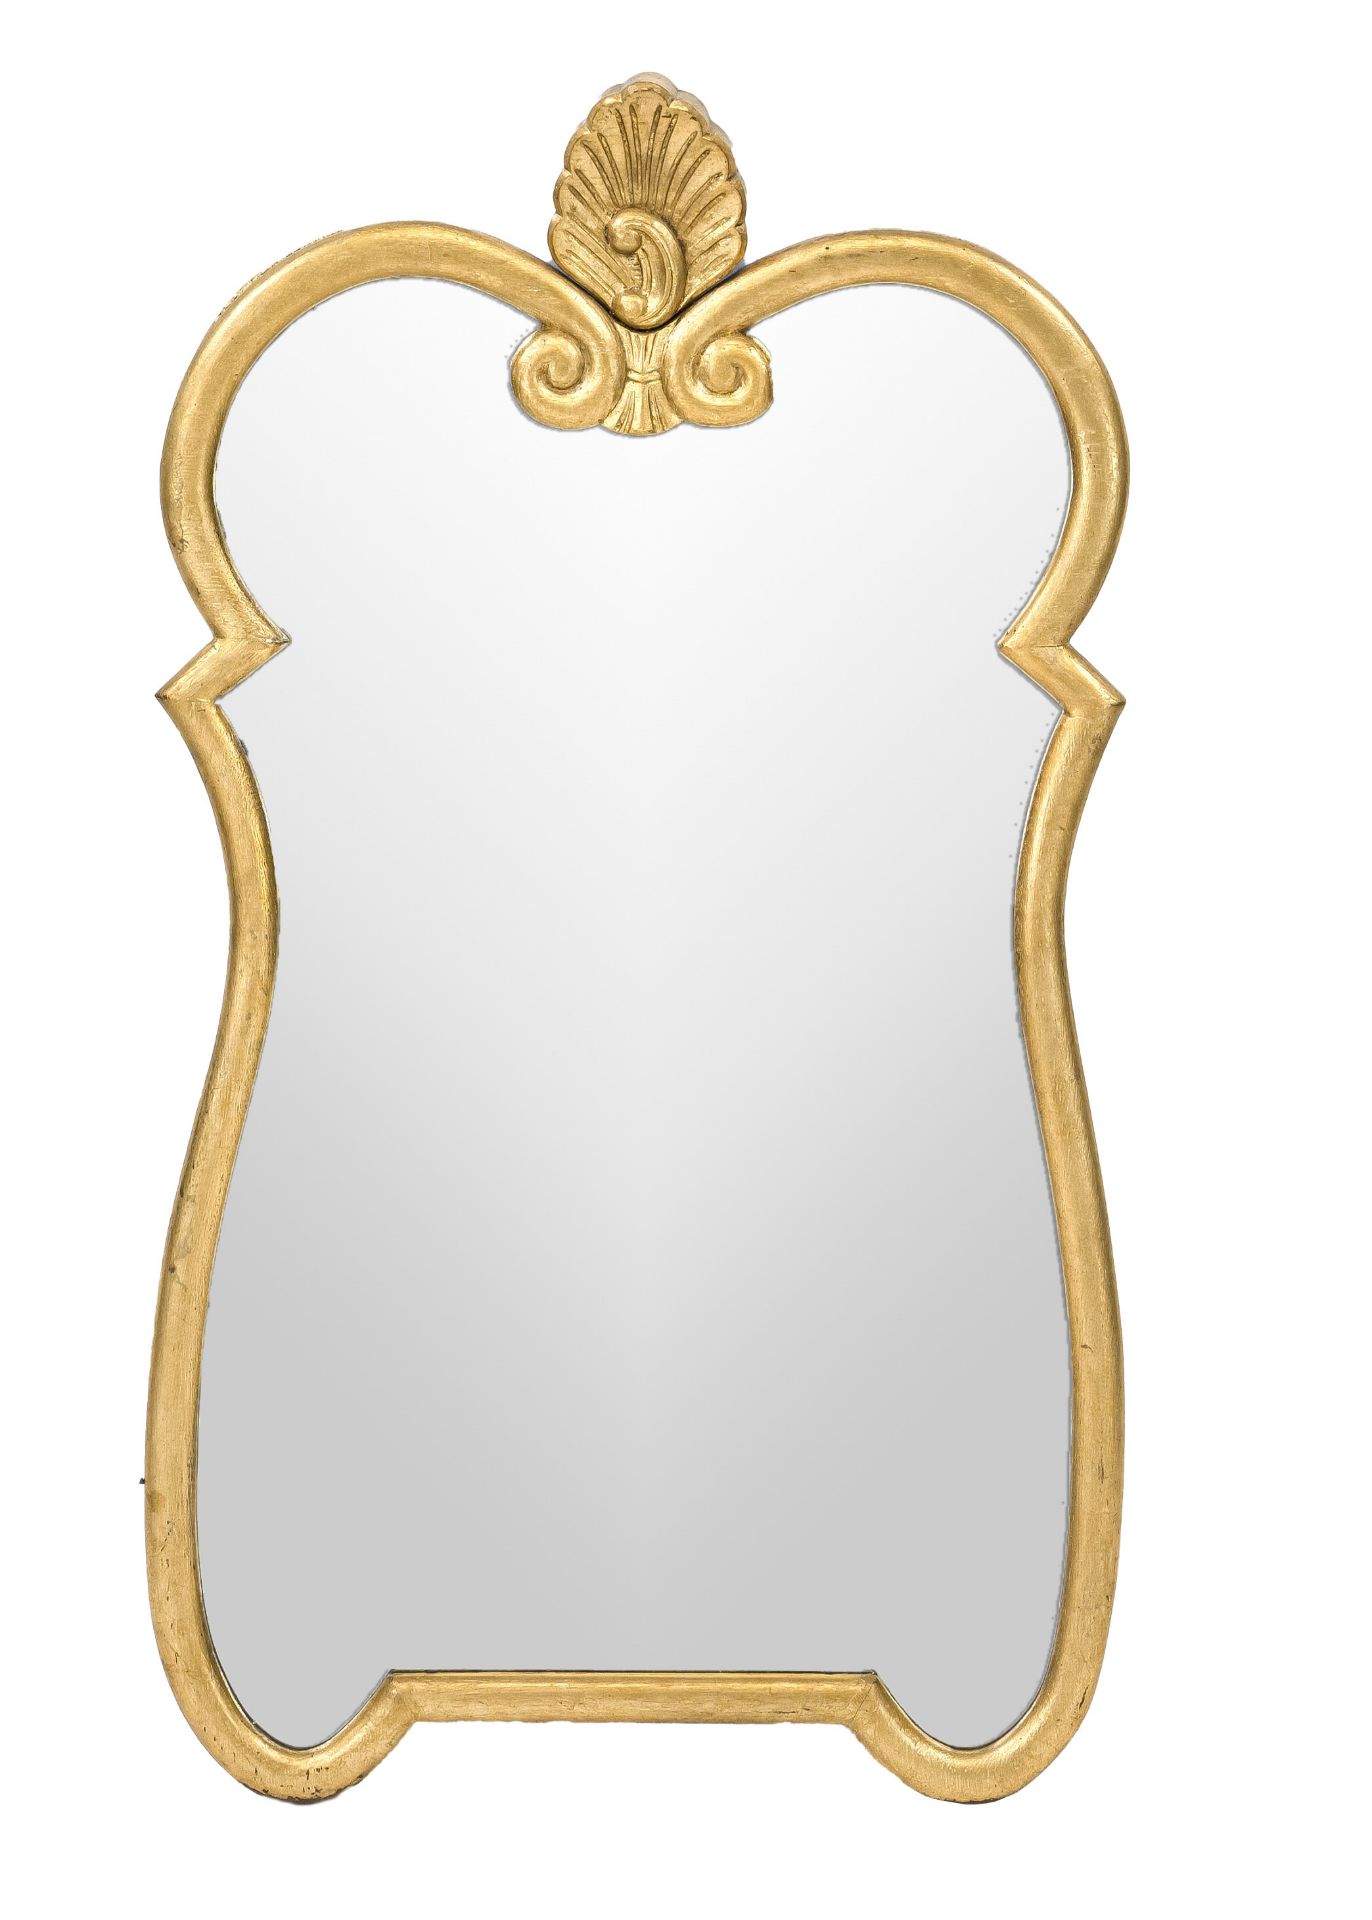 Wall mirror, 20th century, gold-bronzed wooden frame, faceted mirror, 81 x 45 cm